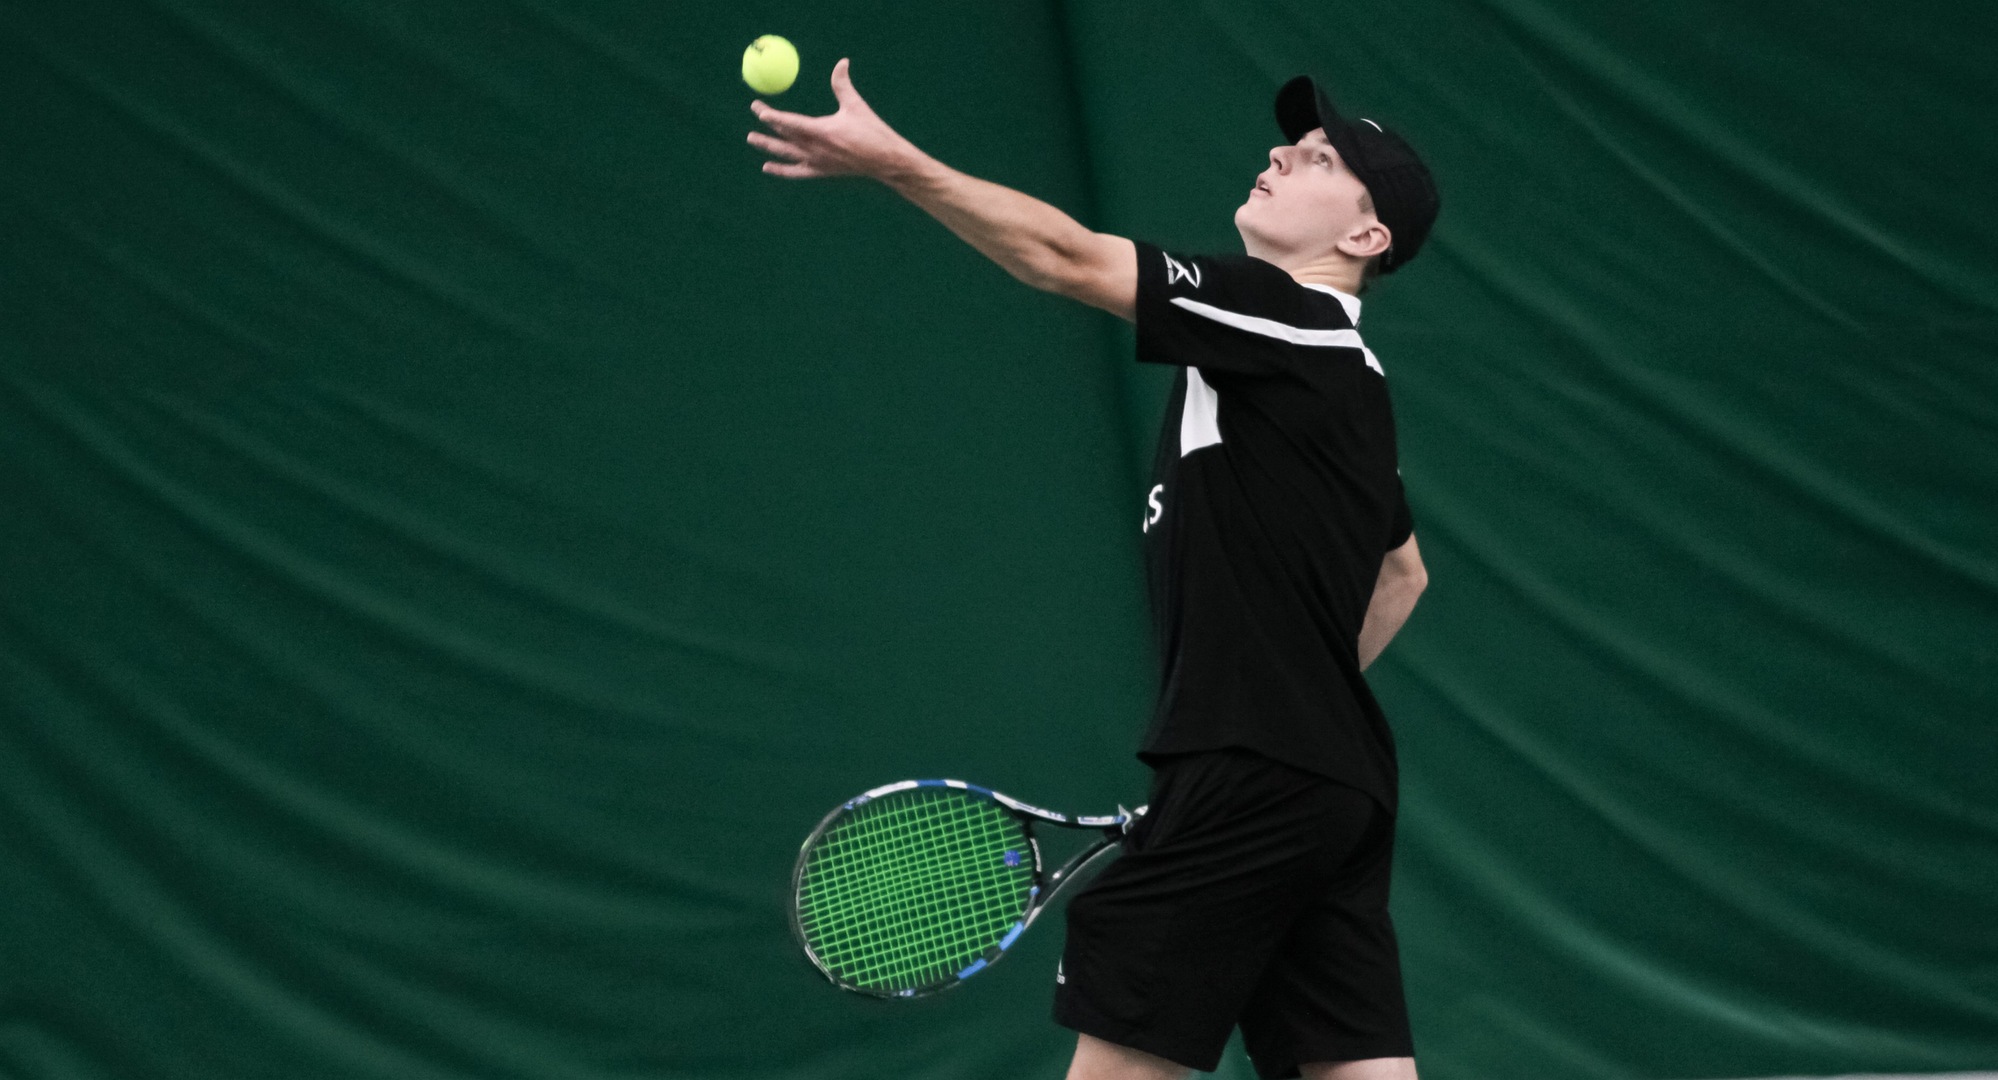 Terry & Phillips Pick Up Singles Wins In Setback At Butler